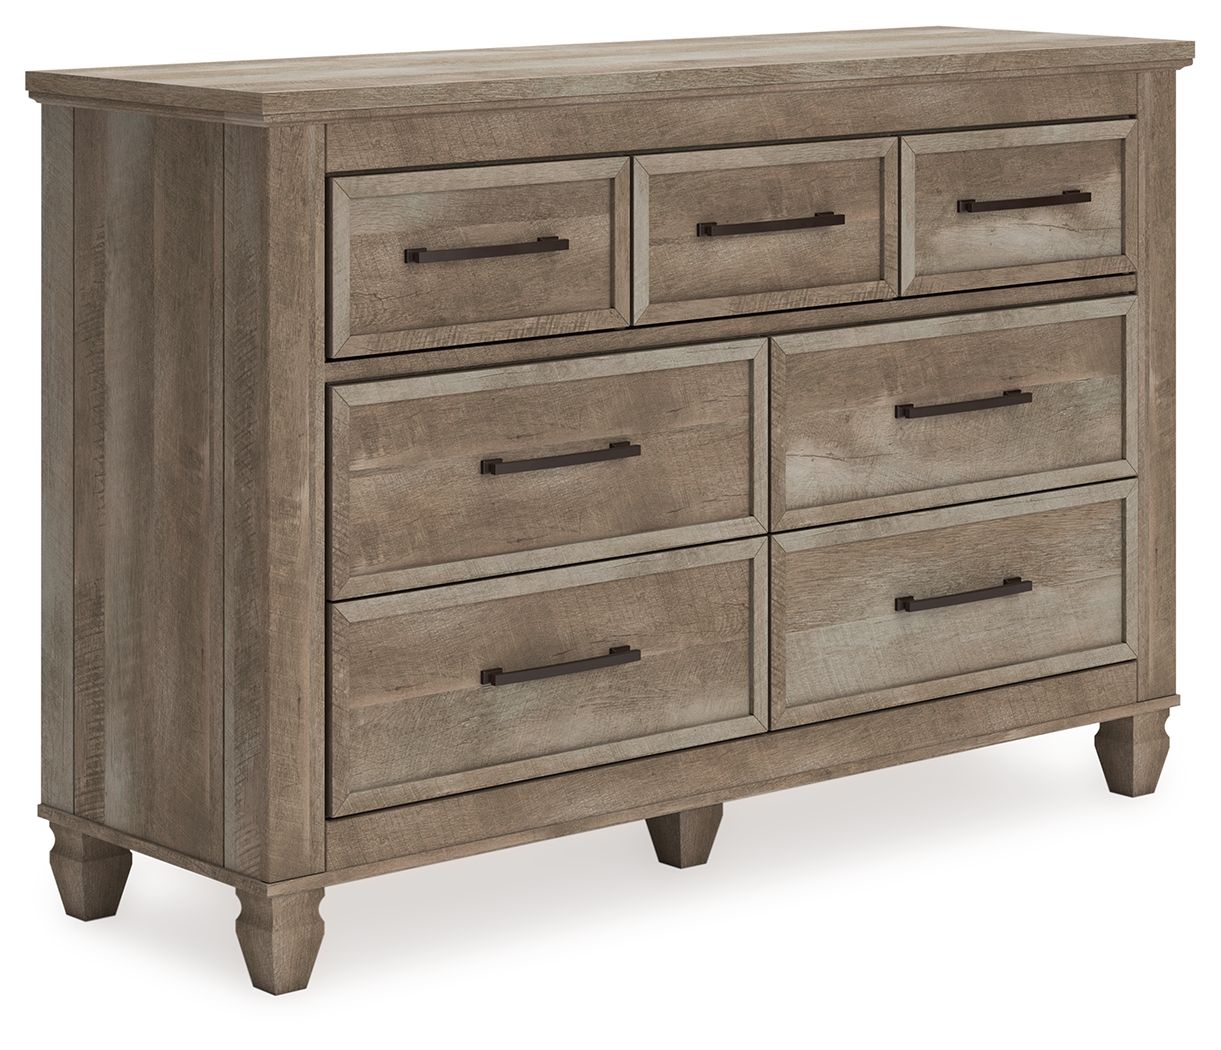 Yarbeck - Sand - Seven Drawer Dresser Tony's Home Furnishings Furniture. Beds. Dressers. Sofas.